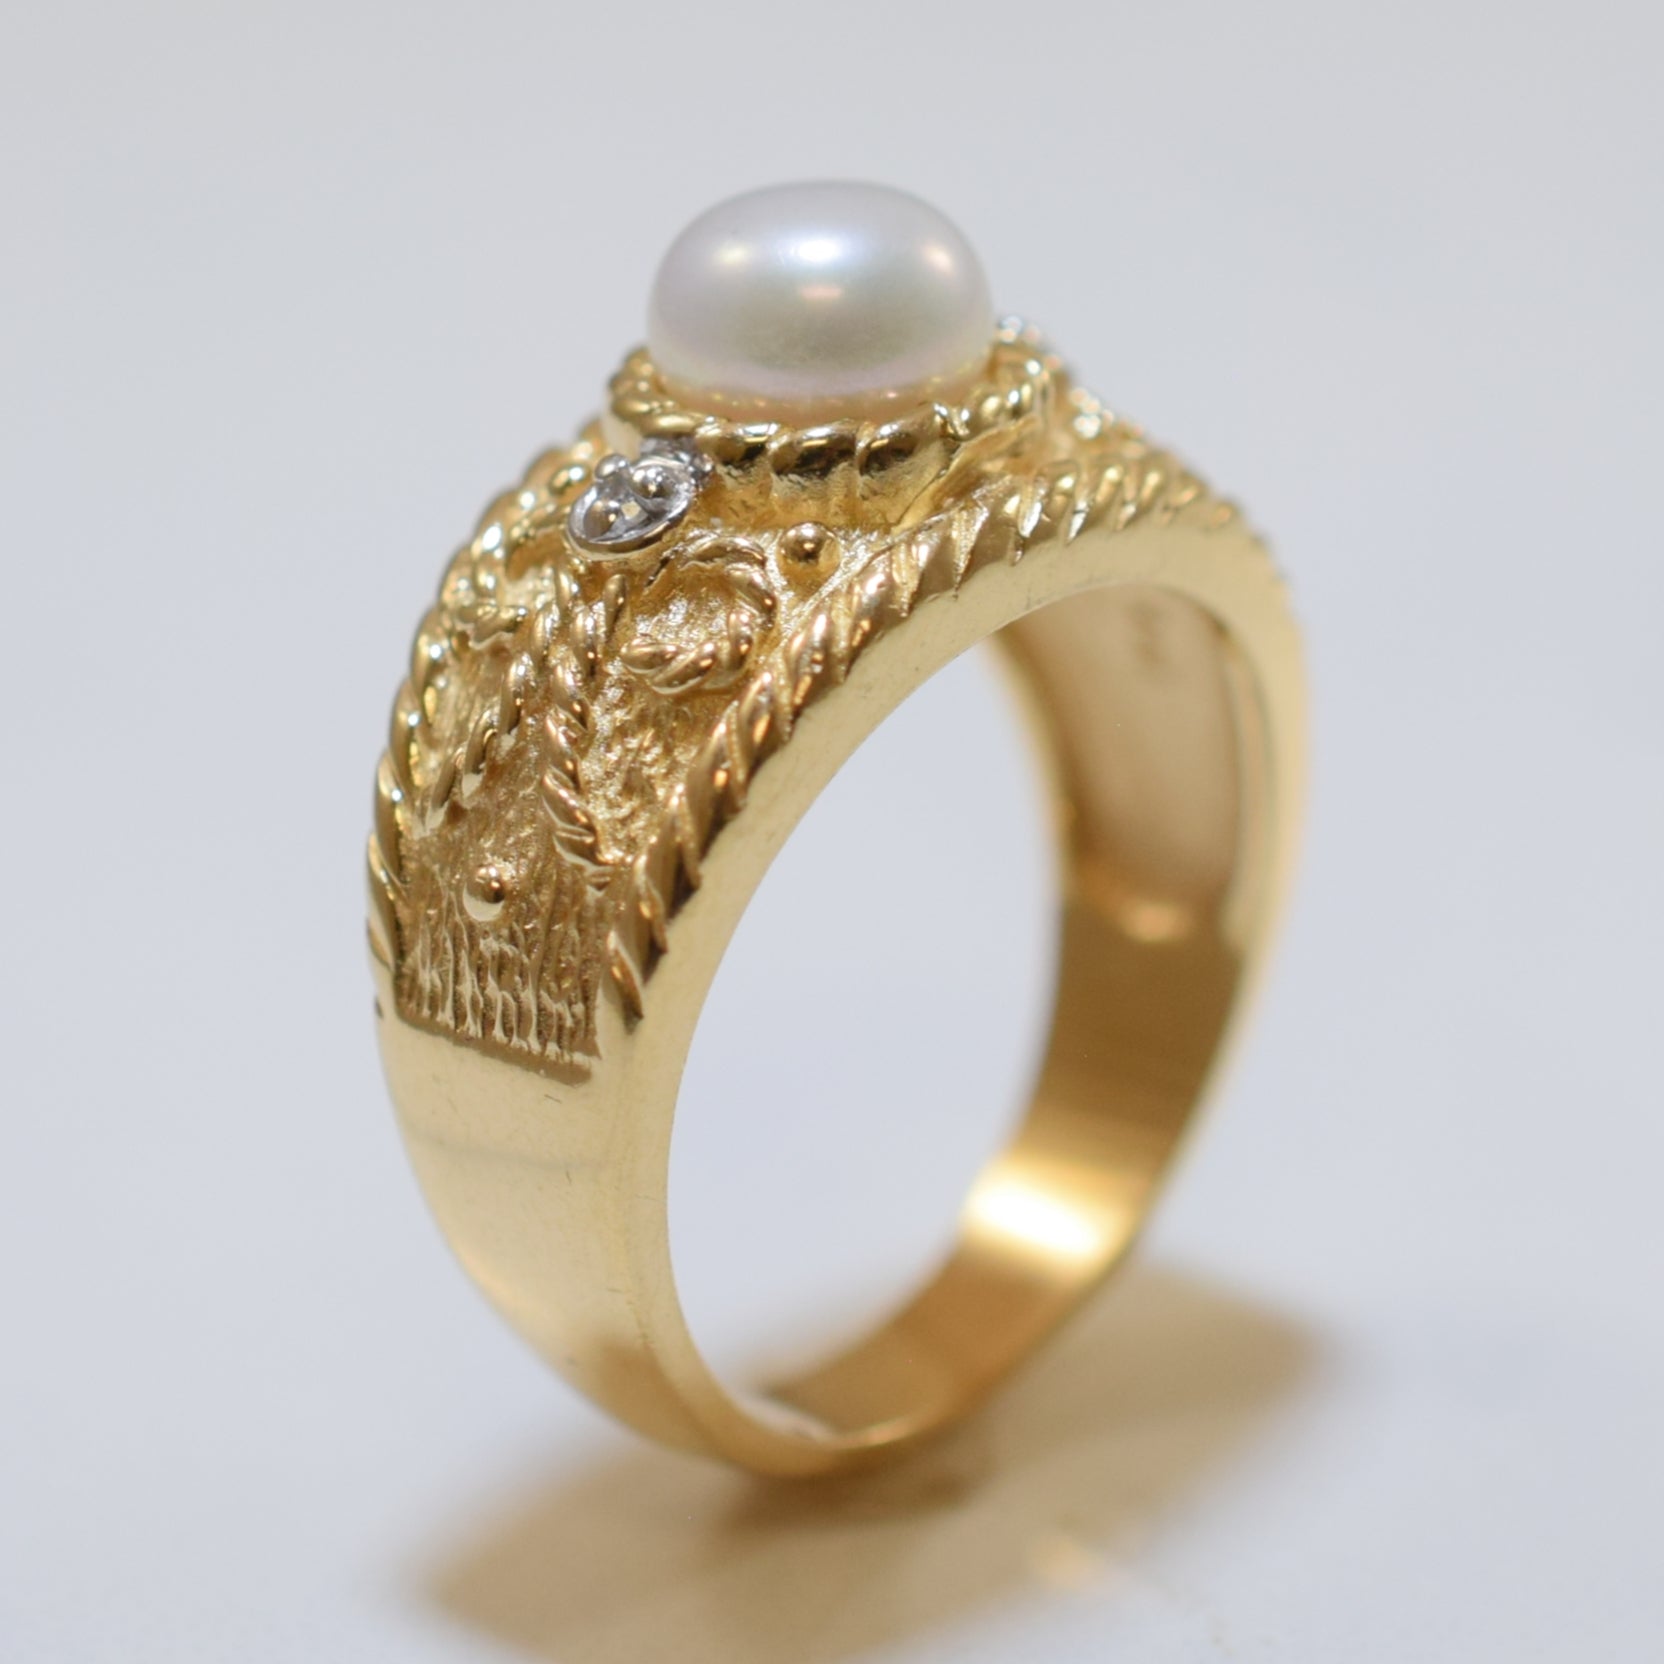 Button Pearl & Diamond Tapered Ring | 0.60ct, 0.01ctw | SZ 6.75 |